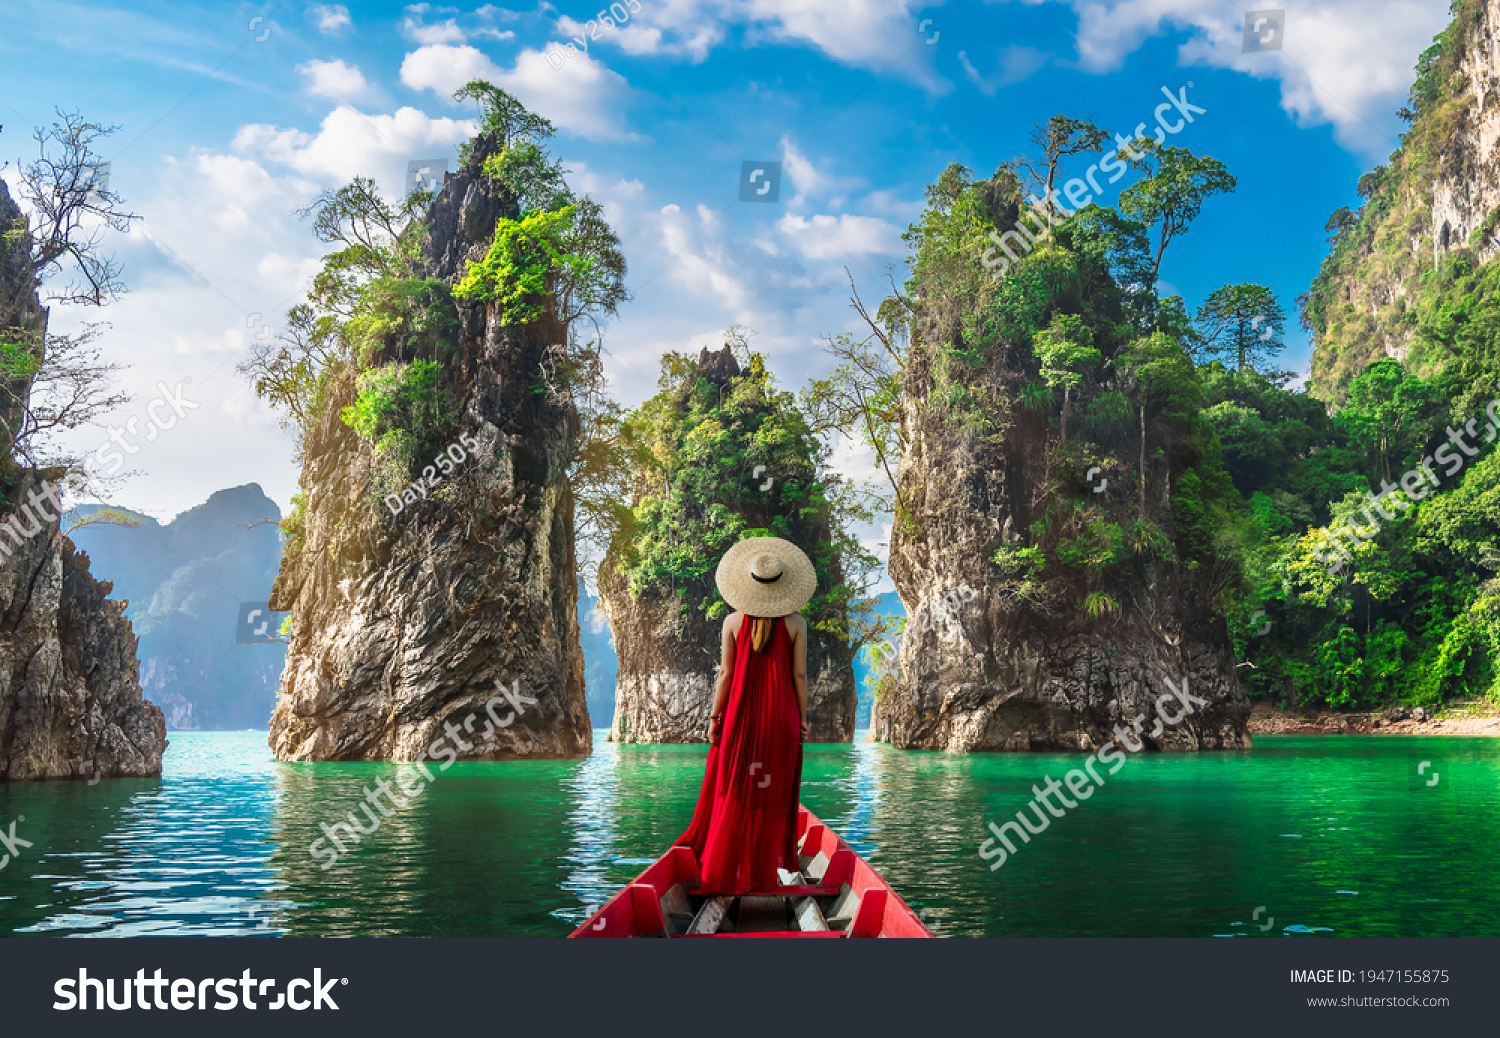 Woman traveler on boat joy nature view rock island scenic landscape Khao Sok National Park, Famous attraction adventure place travel Thailand, Tourism beautiful destinations Asia holiday vacation trip #1947155875